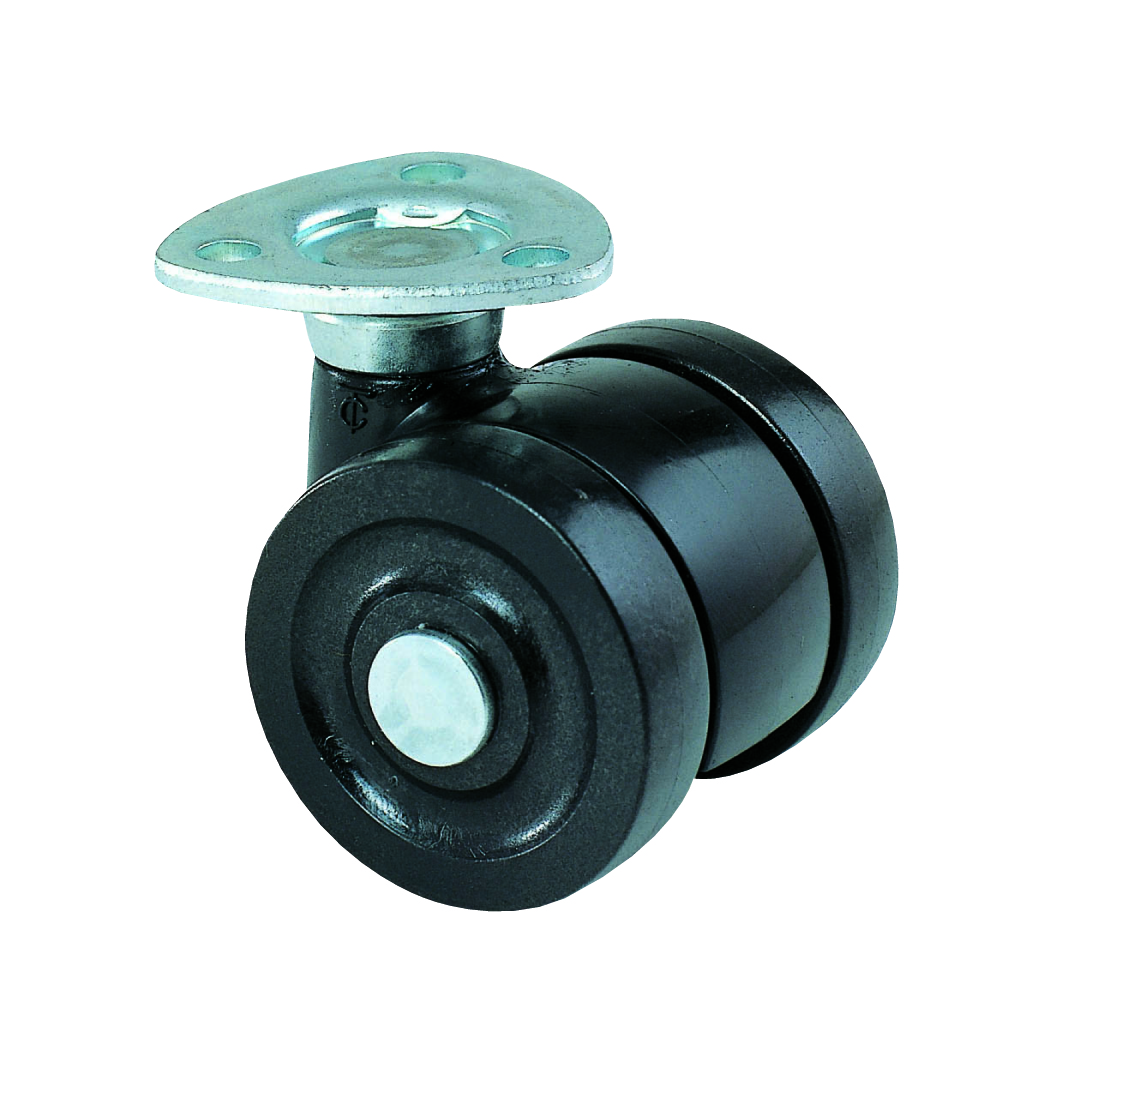 Casters - With swivel plate, reinforced plastic double caster, without brake, TX40/TX50 series. TX50